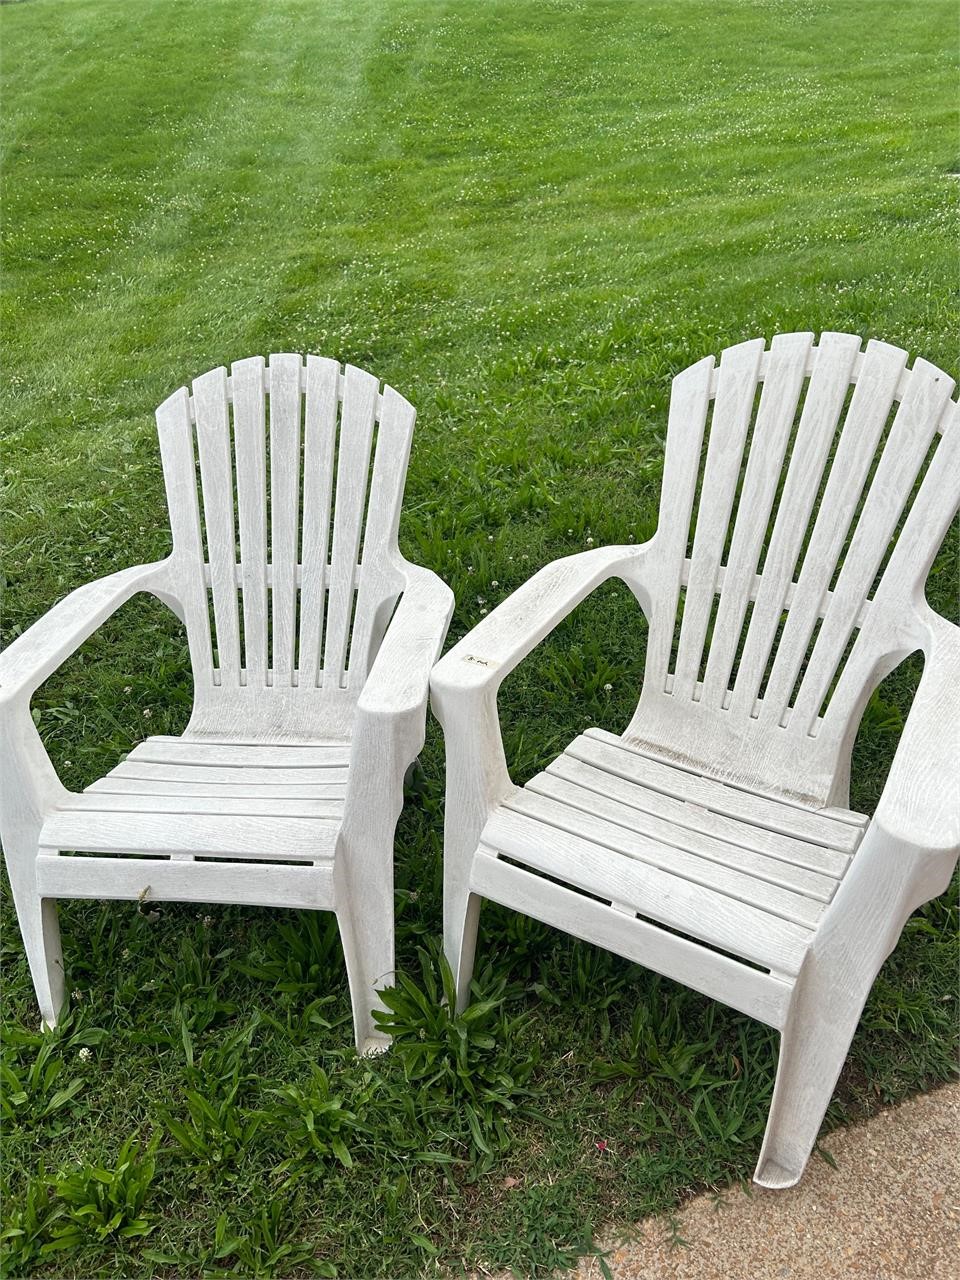 Two white patio chairs